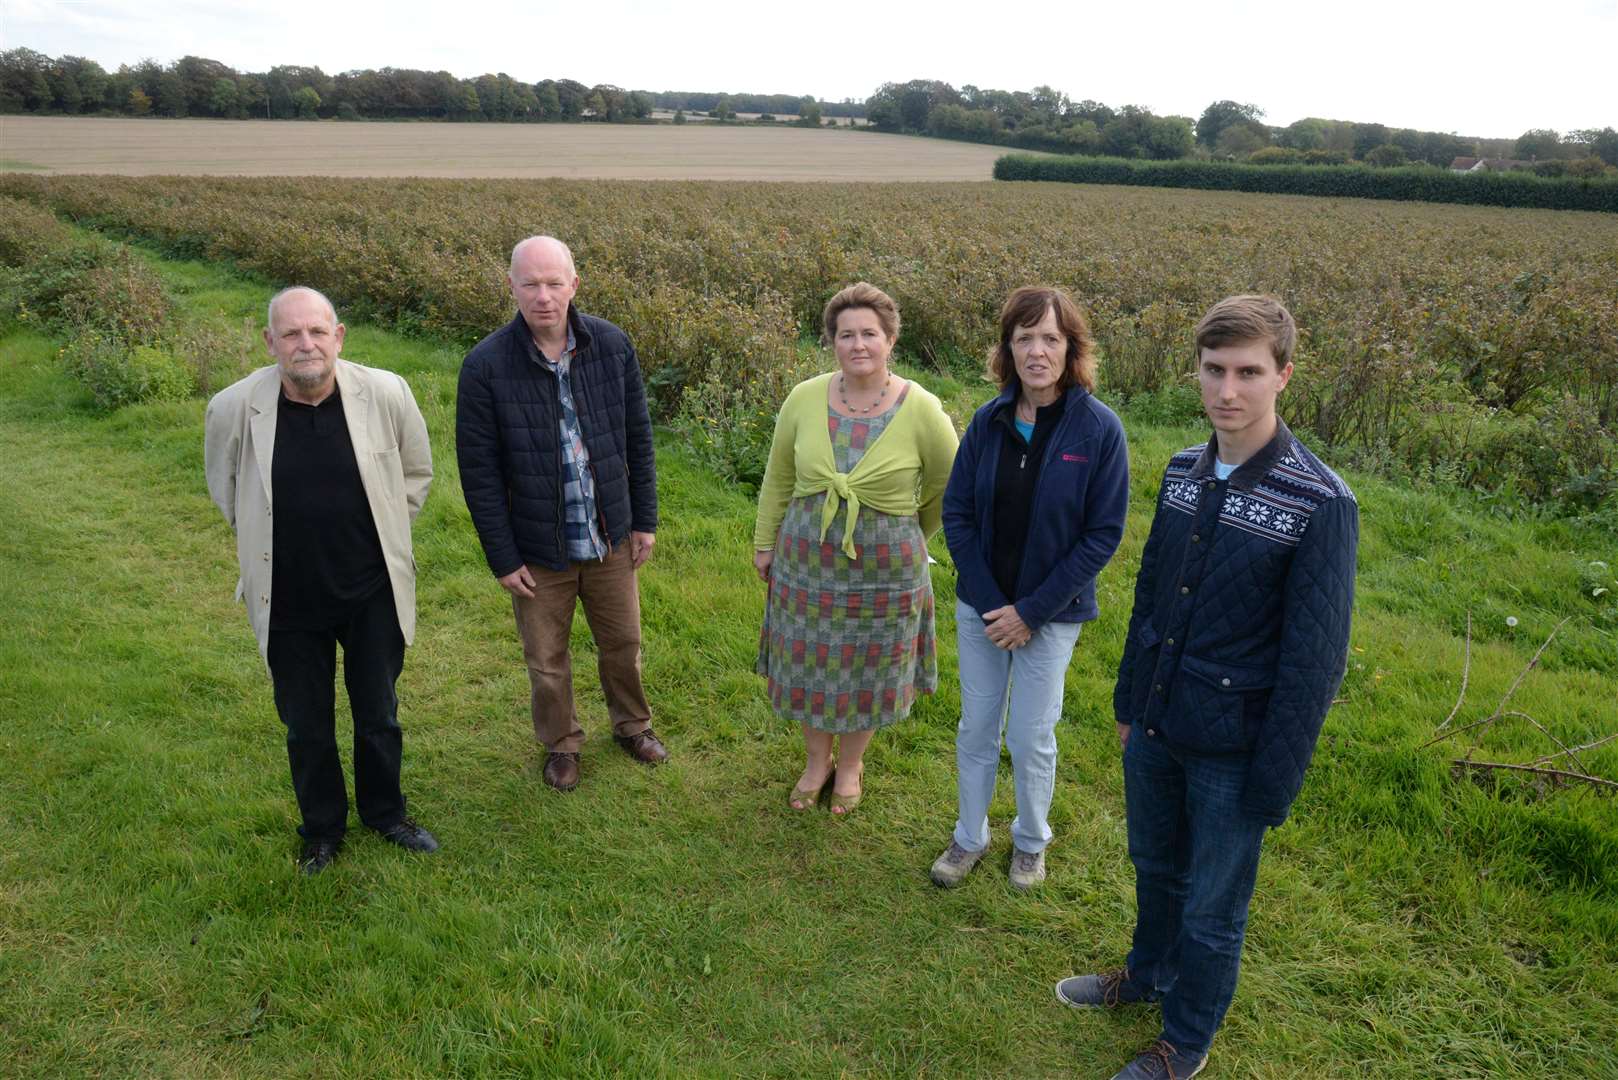 Dave Howe, left, and fellow residents Mike Sole, Camilla Presland, Penny Morgan and Jack Lowe, who are concerned over plans for 175 holiday homes on land at Highland Court Farm. Picture: Chris Davey